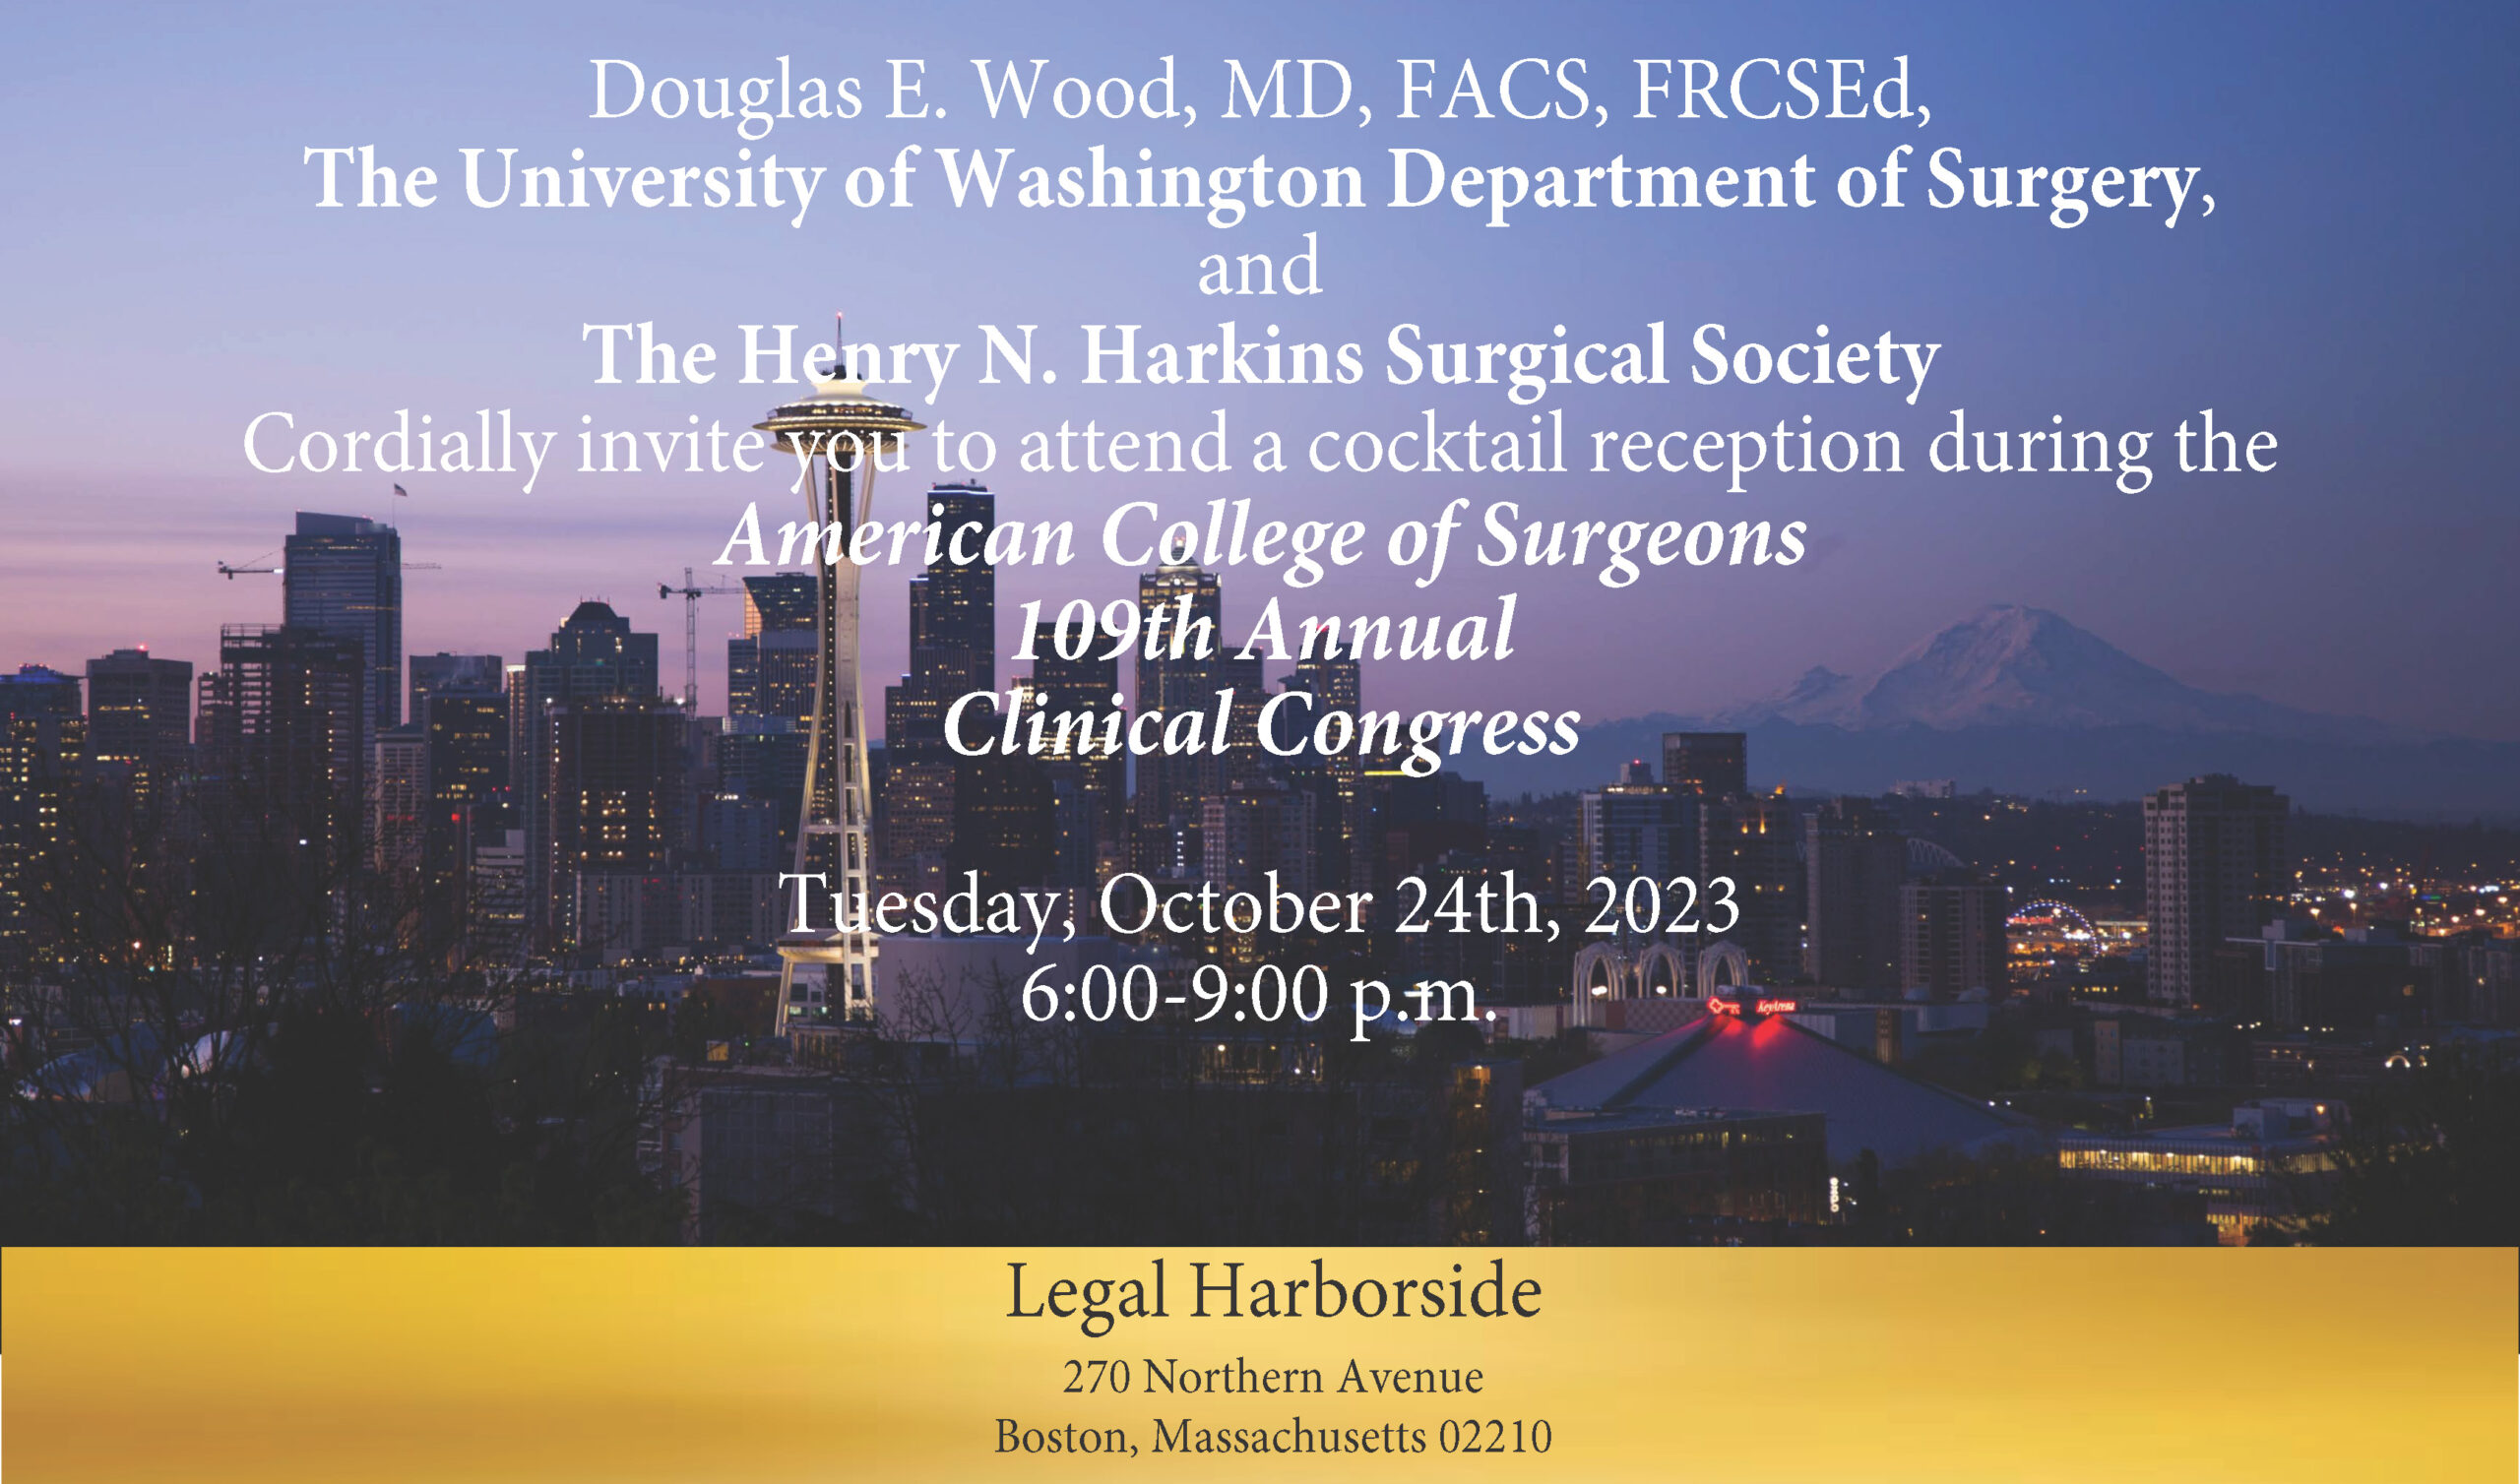 2023 American College of Surgeons 109th Annual Clinical Congress